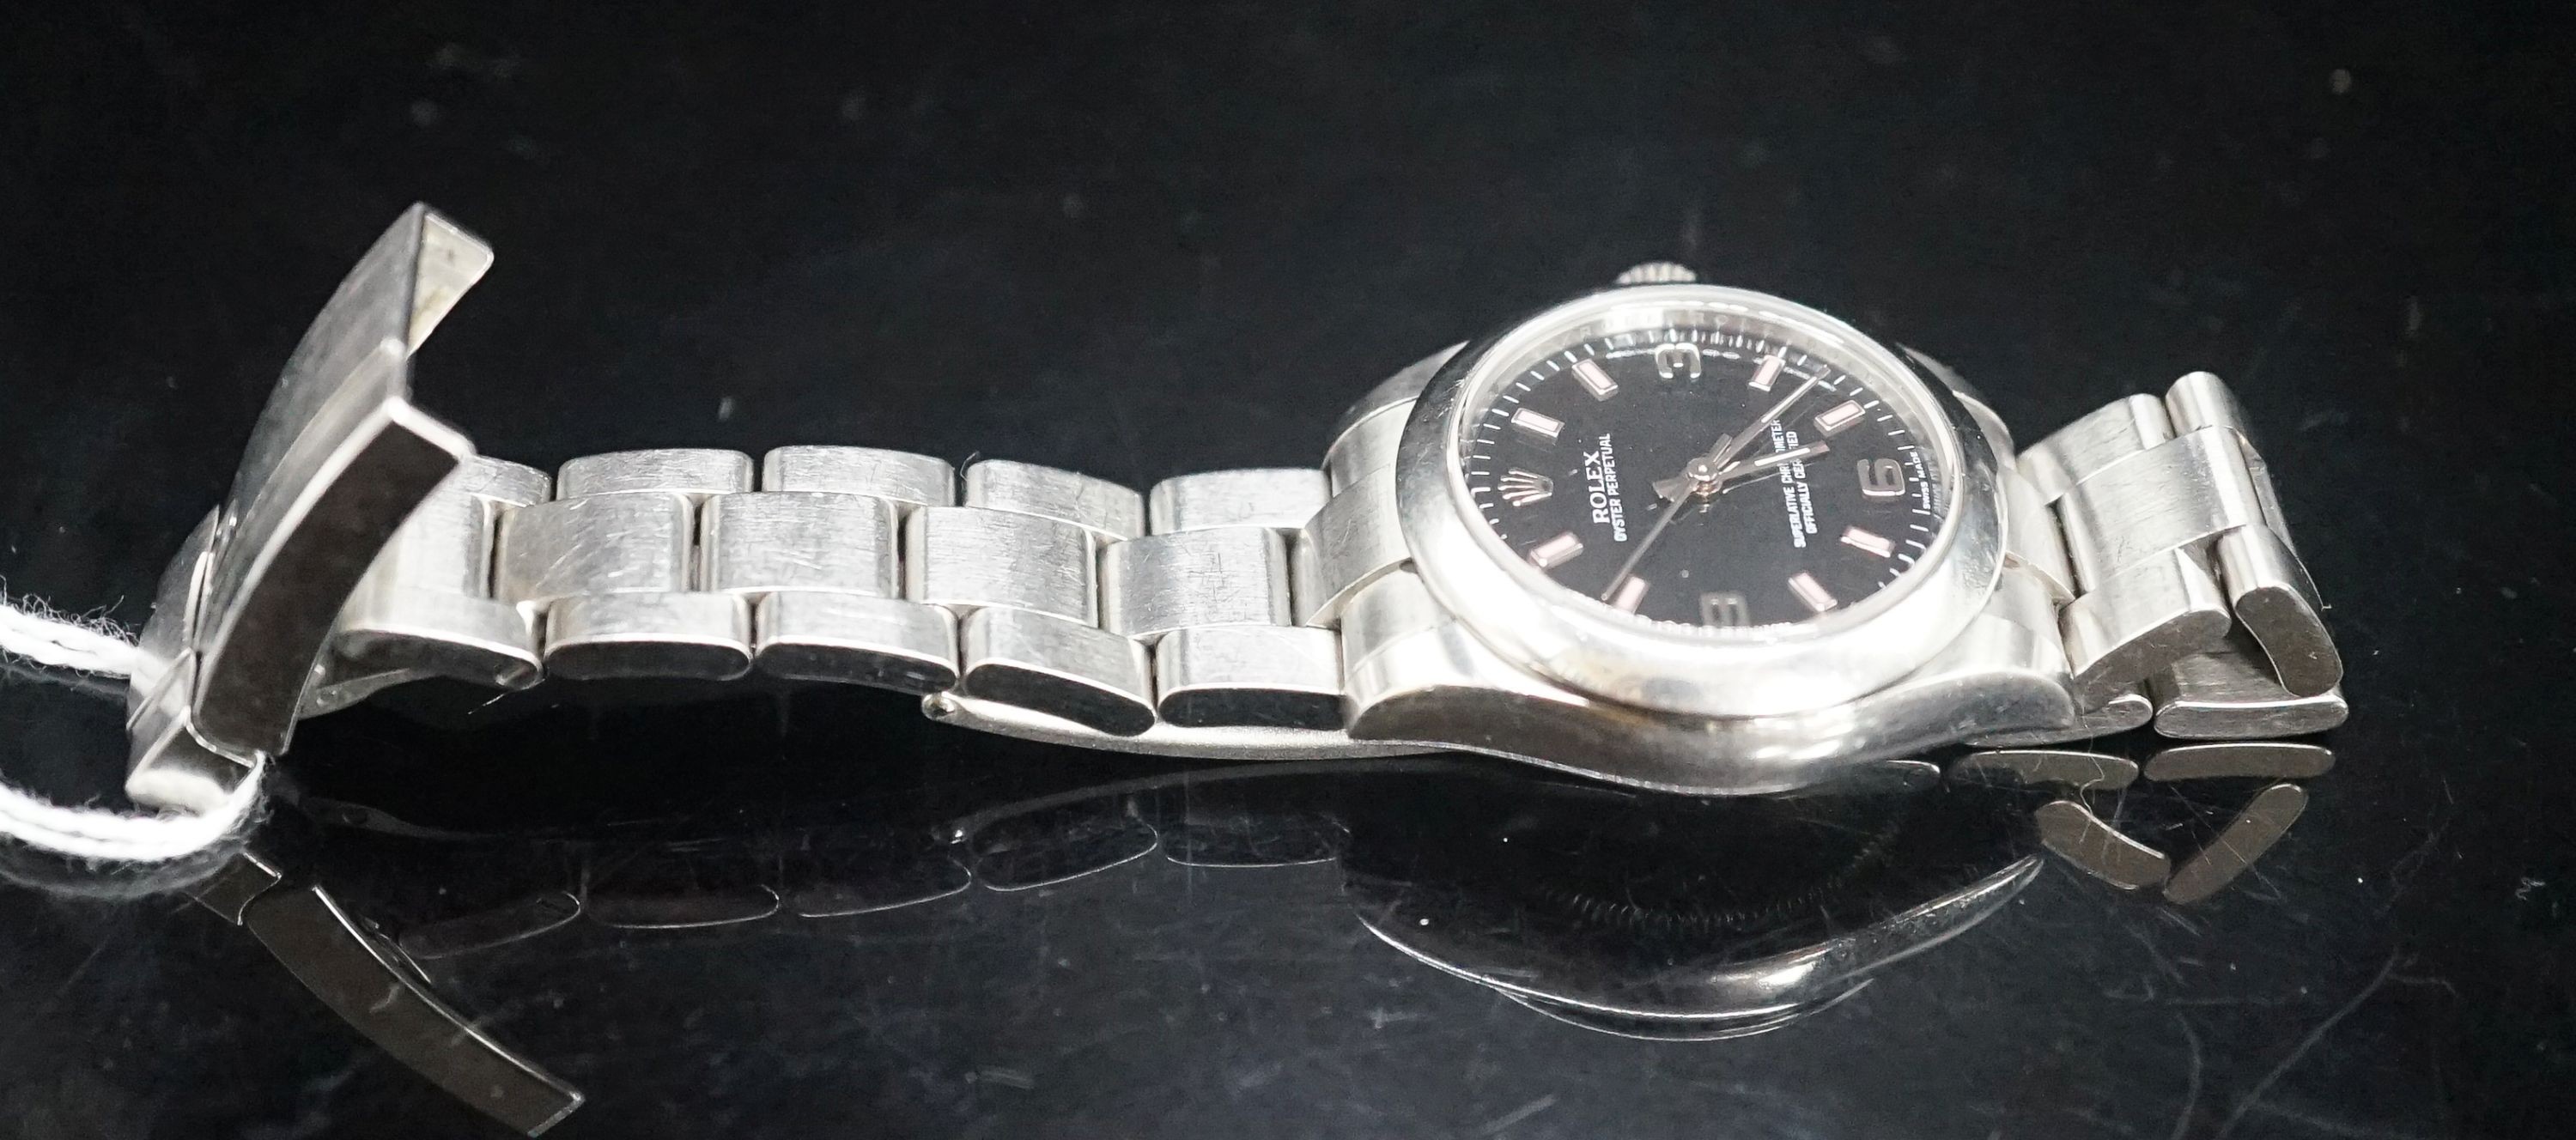 A lady's modern stainless steel Rolex Oyster Perpetual wrist watch, on a stainless steel Rolex bracelet, case diameter 31mm, no box or papers.